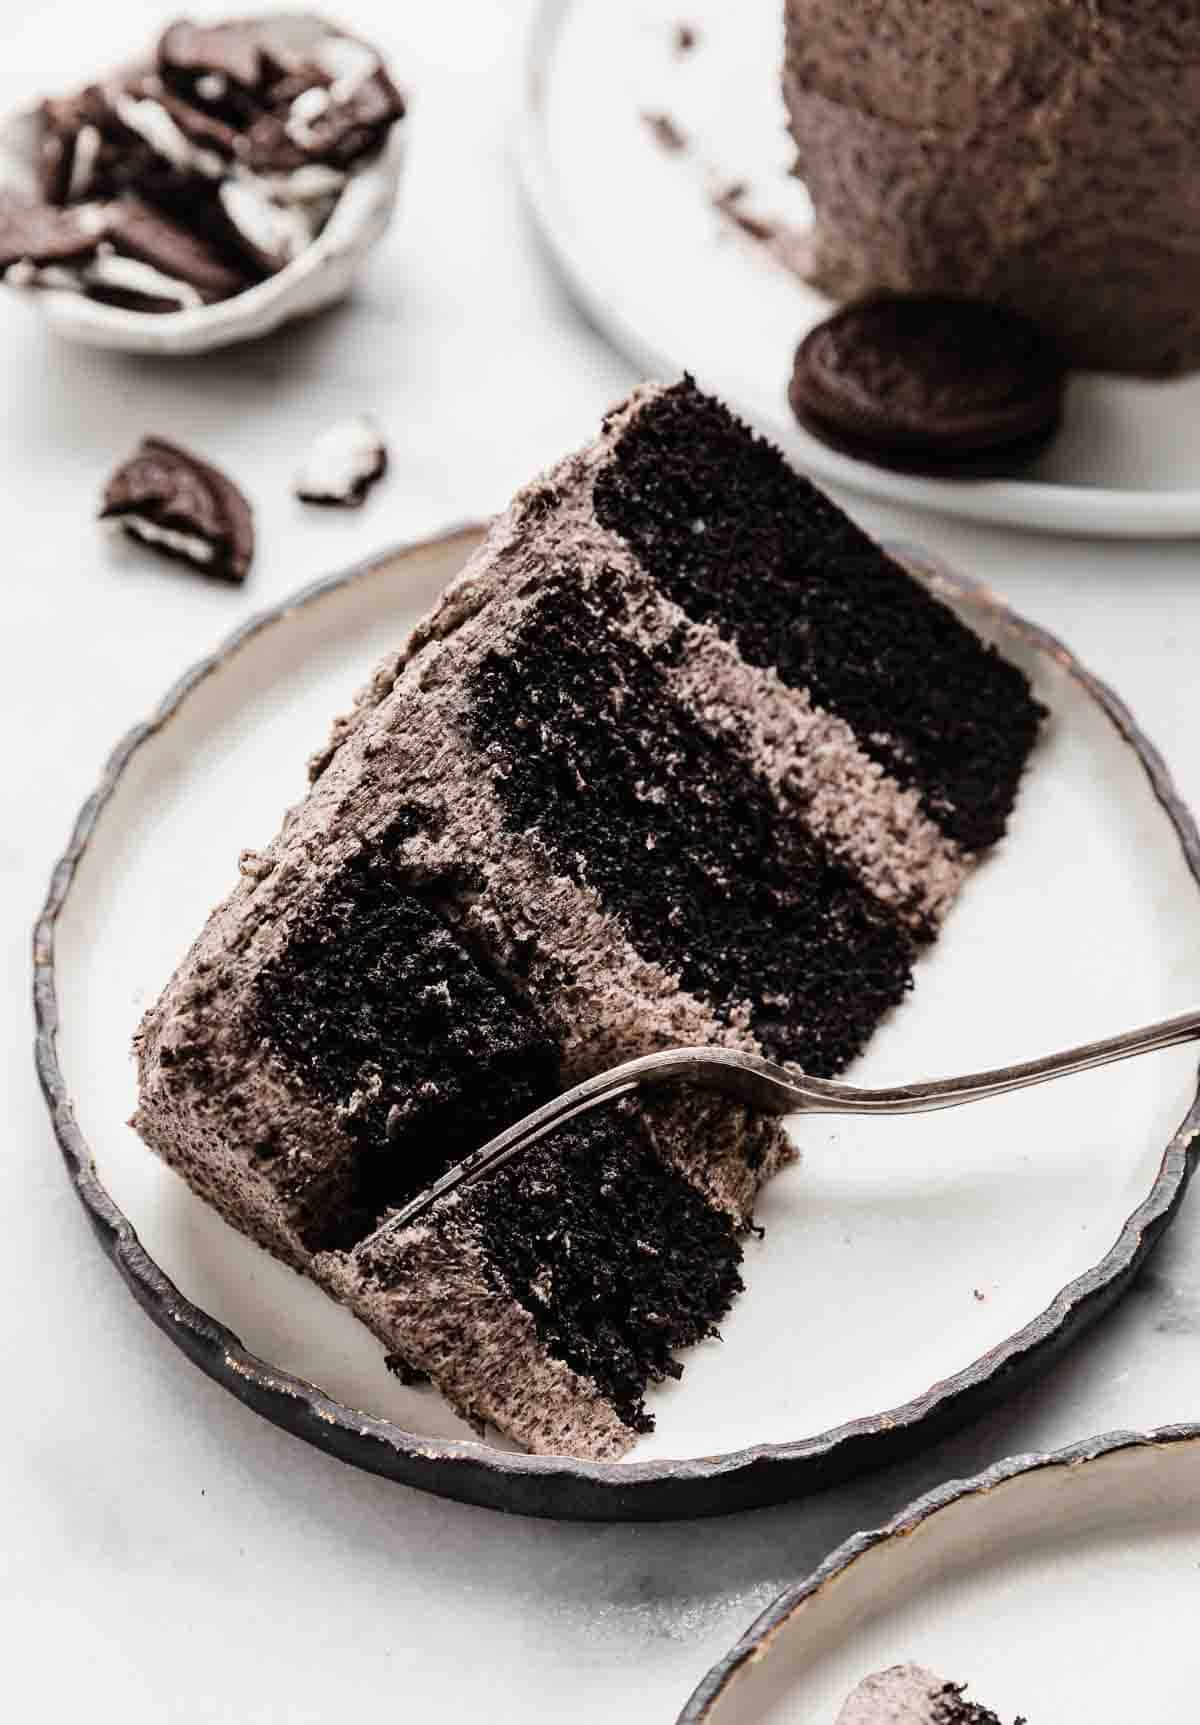 A slice of three tiered oreo cake on a black rimmed white plate with a fork cutting into the top portion of the cake.